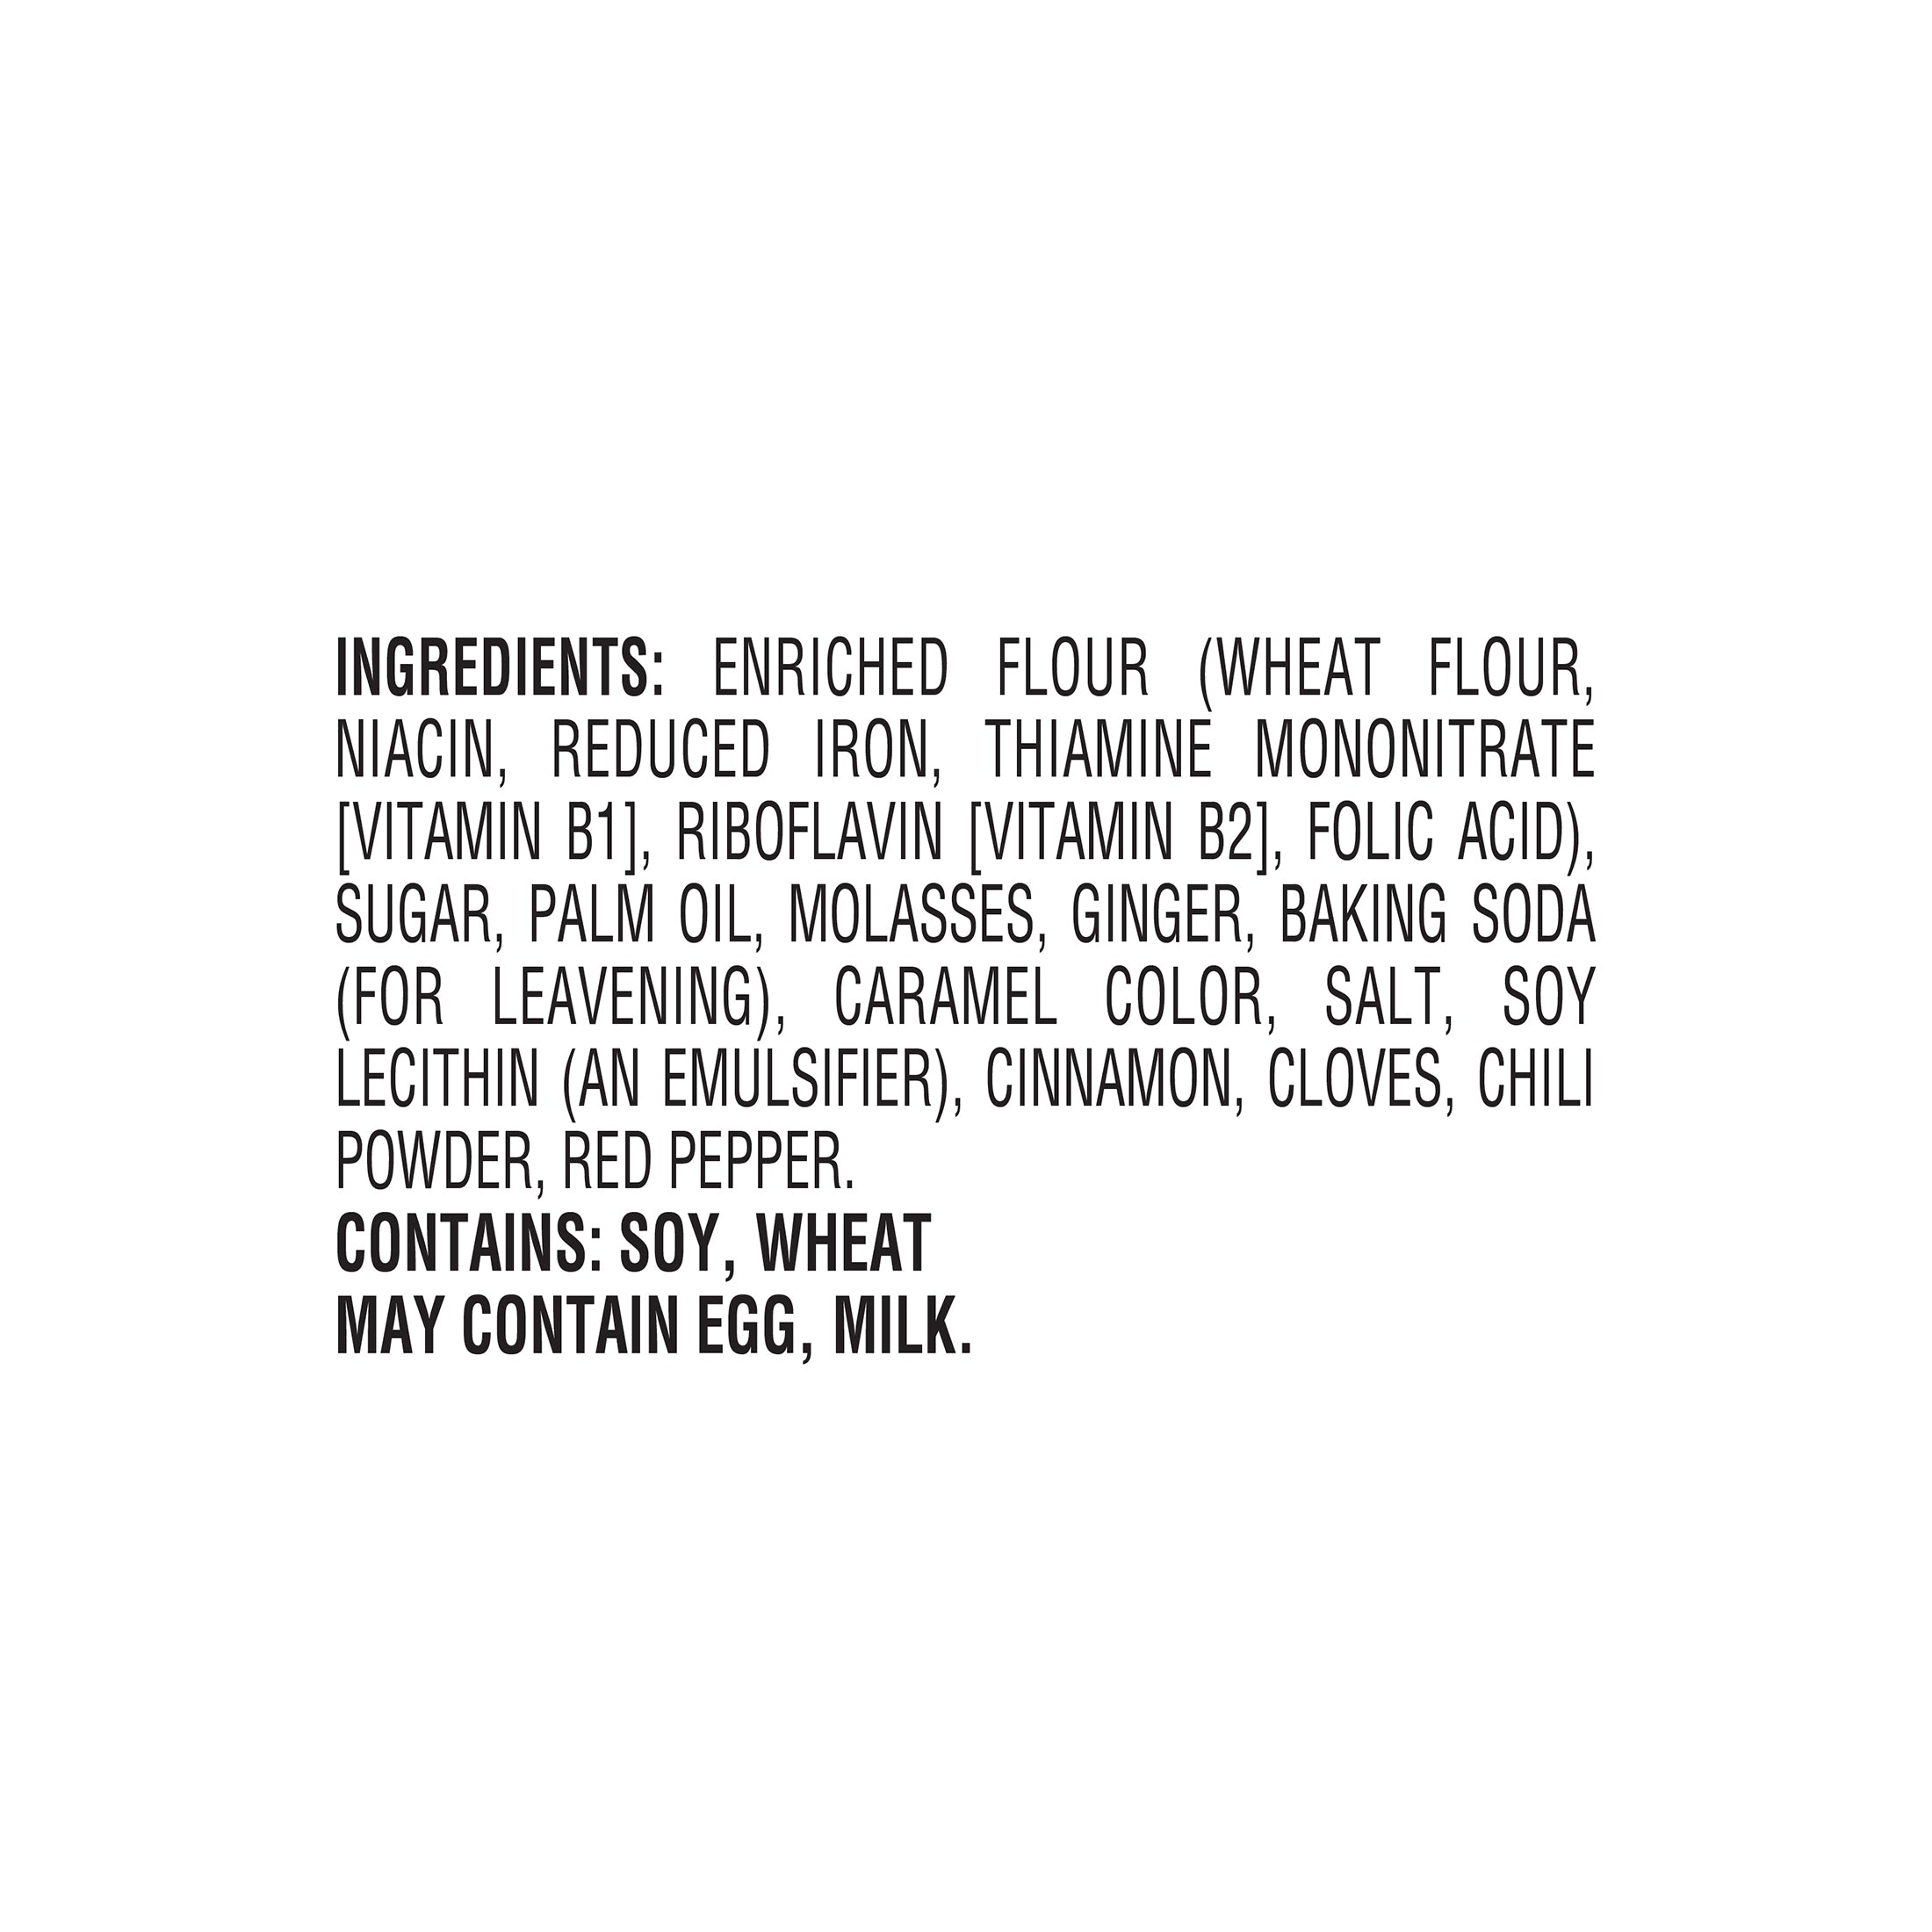 Stauffer's SNAPS Ginger 14oz Bag nutritional facts